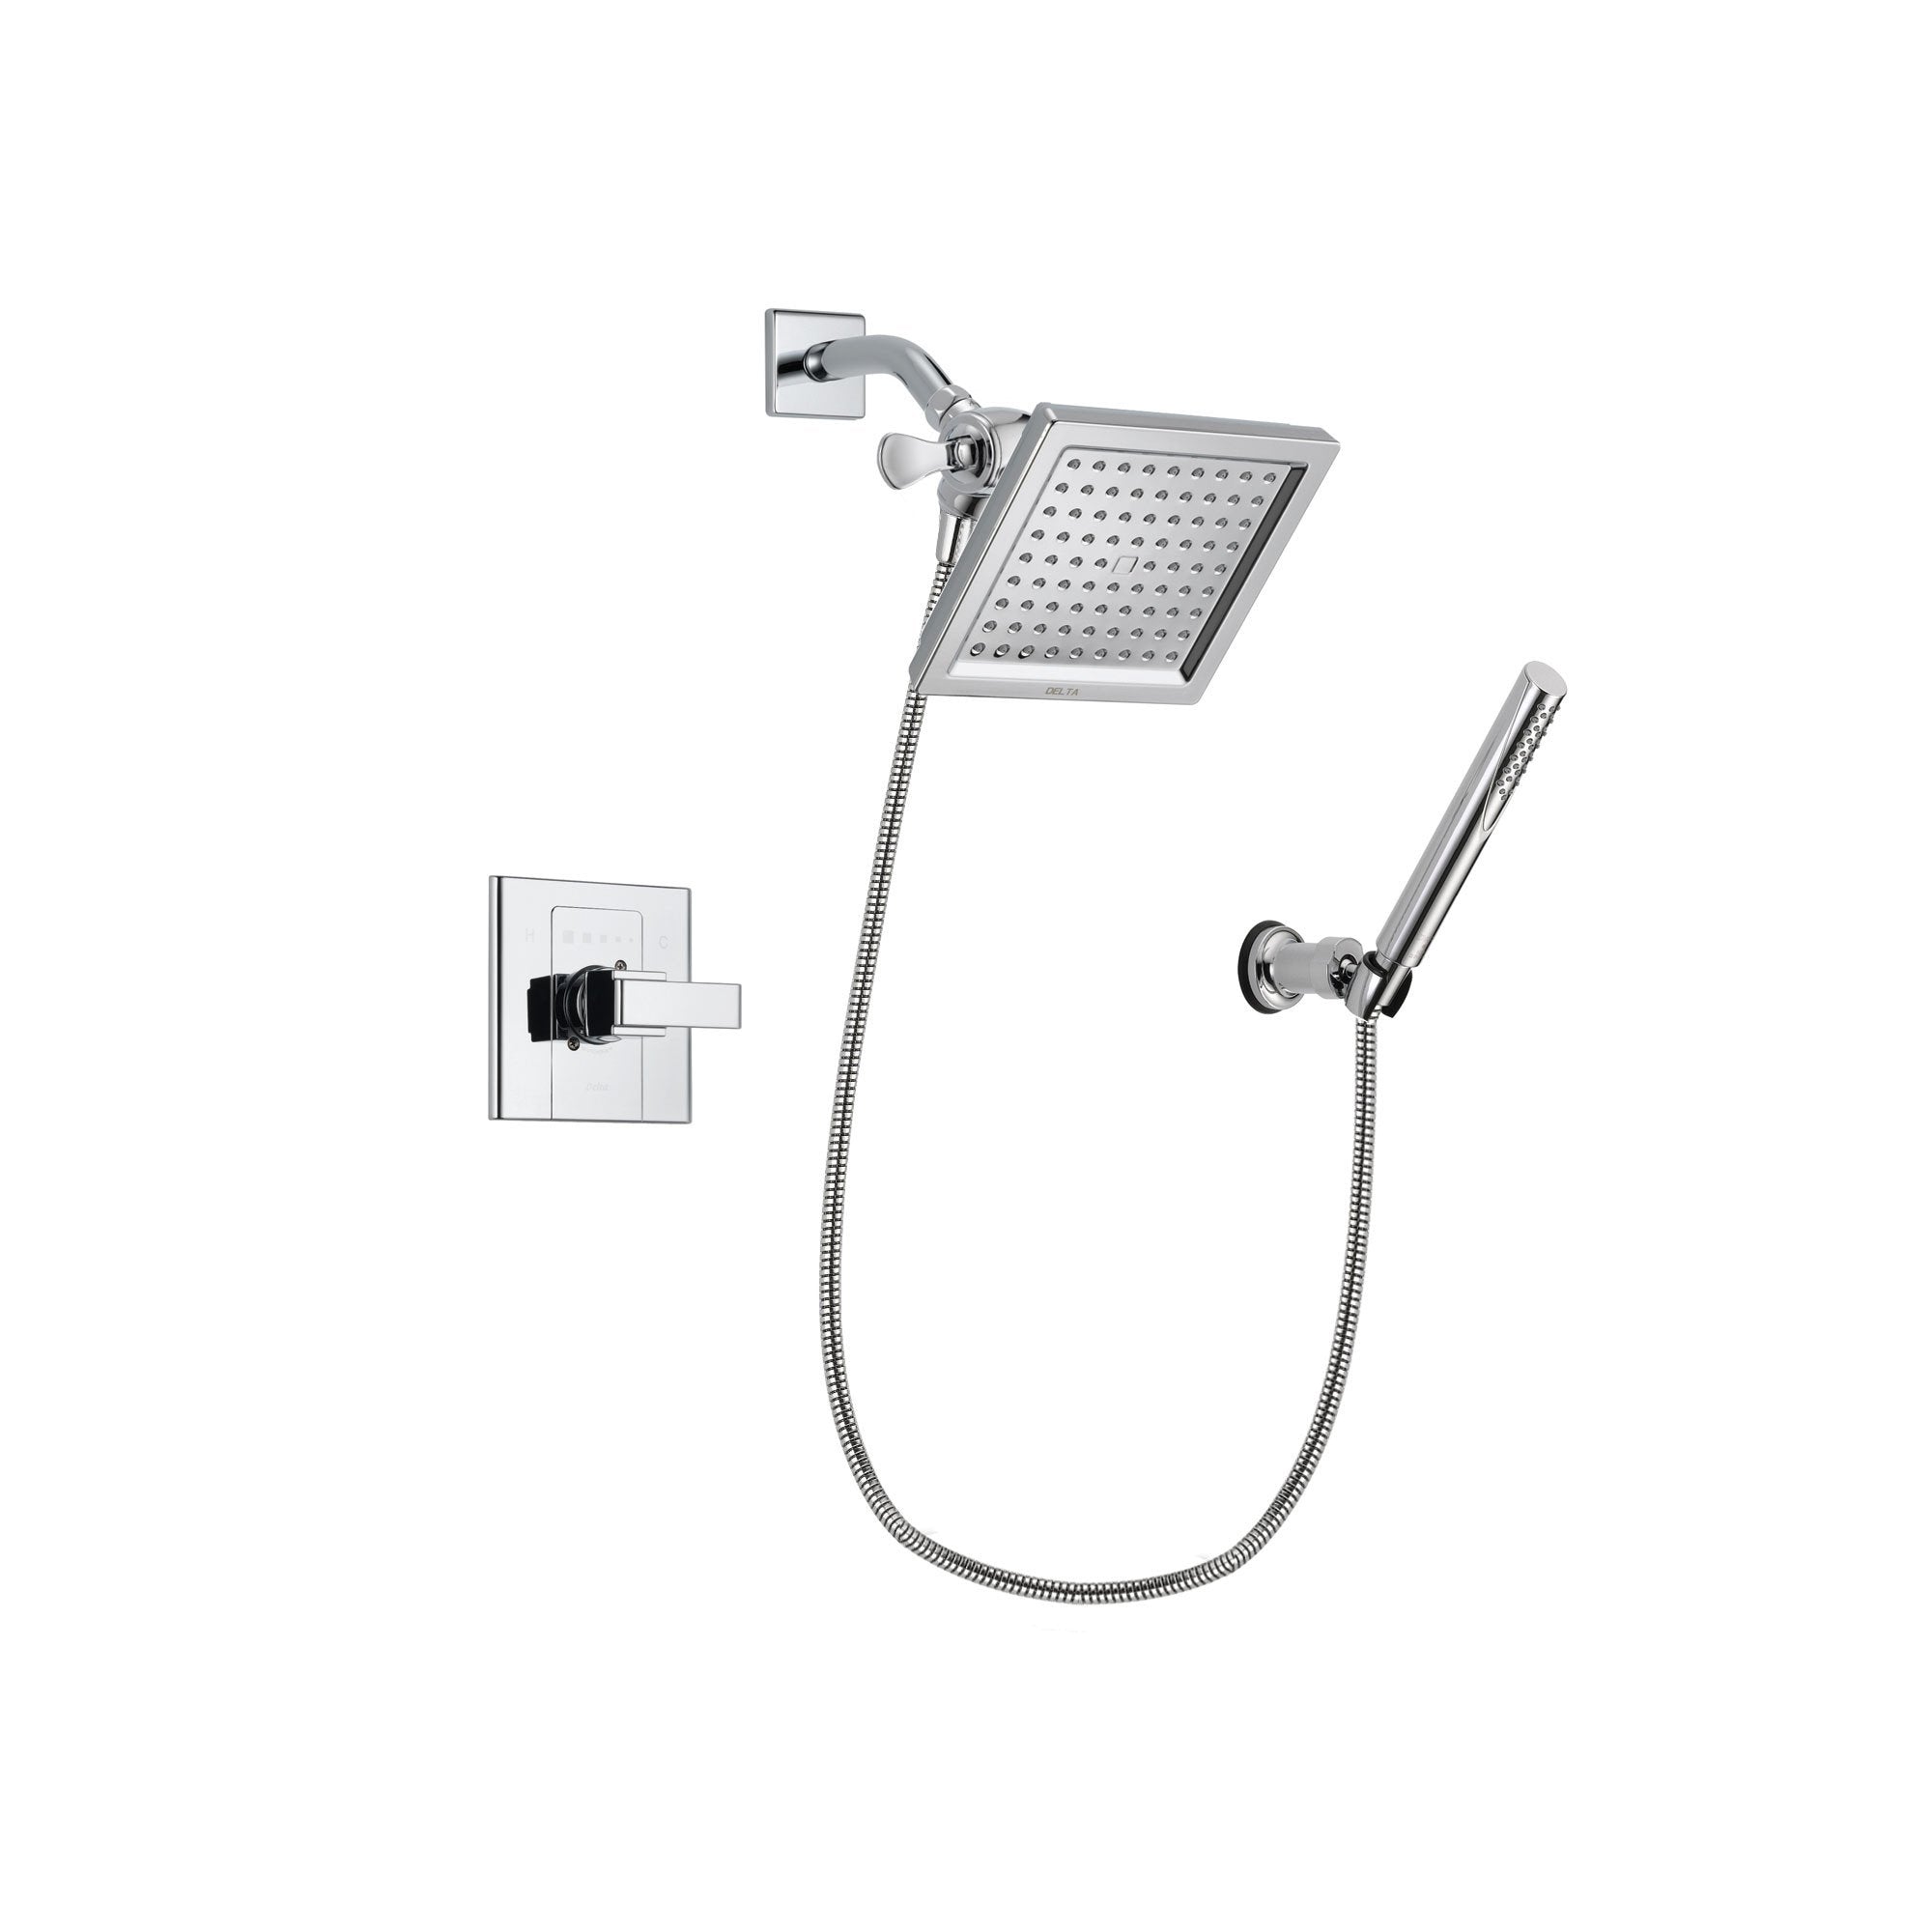 Delta Arzo Chrome Finish Shower Faucet System Package with 6.5-inch Square Rain Showerhead and Modern Handheld Shower Spray with Wall Bracket and Hose Includes Rough-in Valve DSP0076V